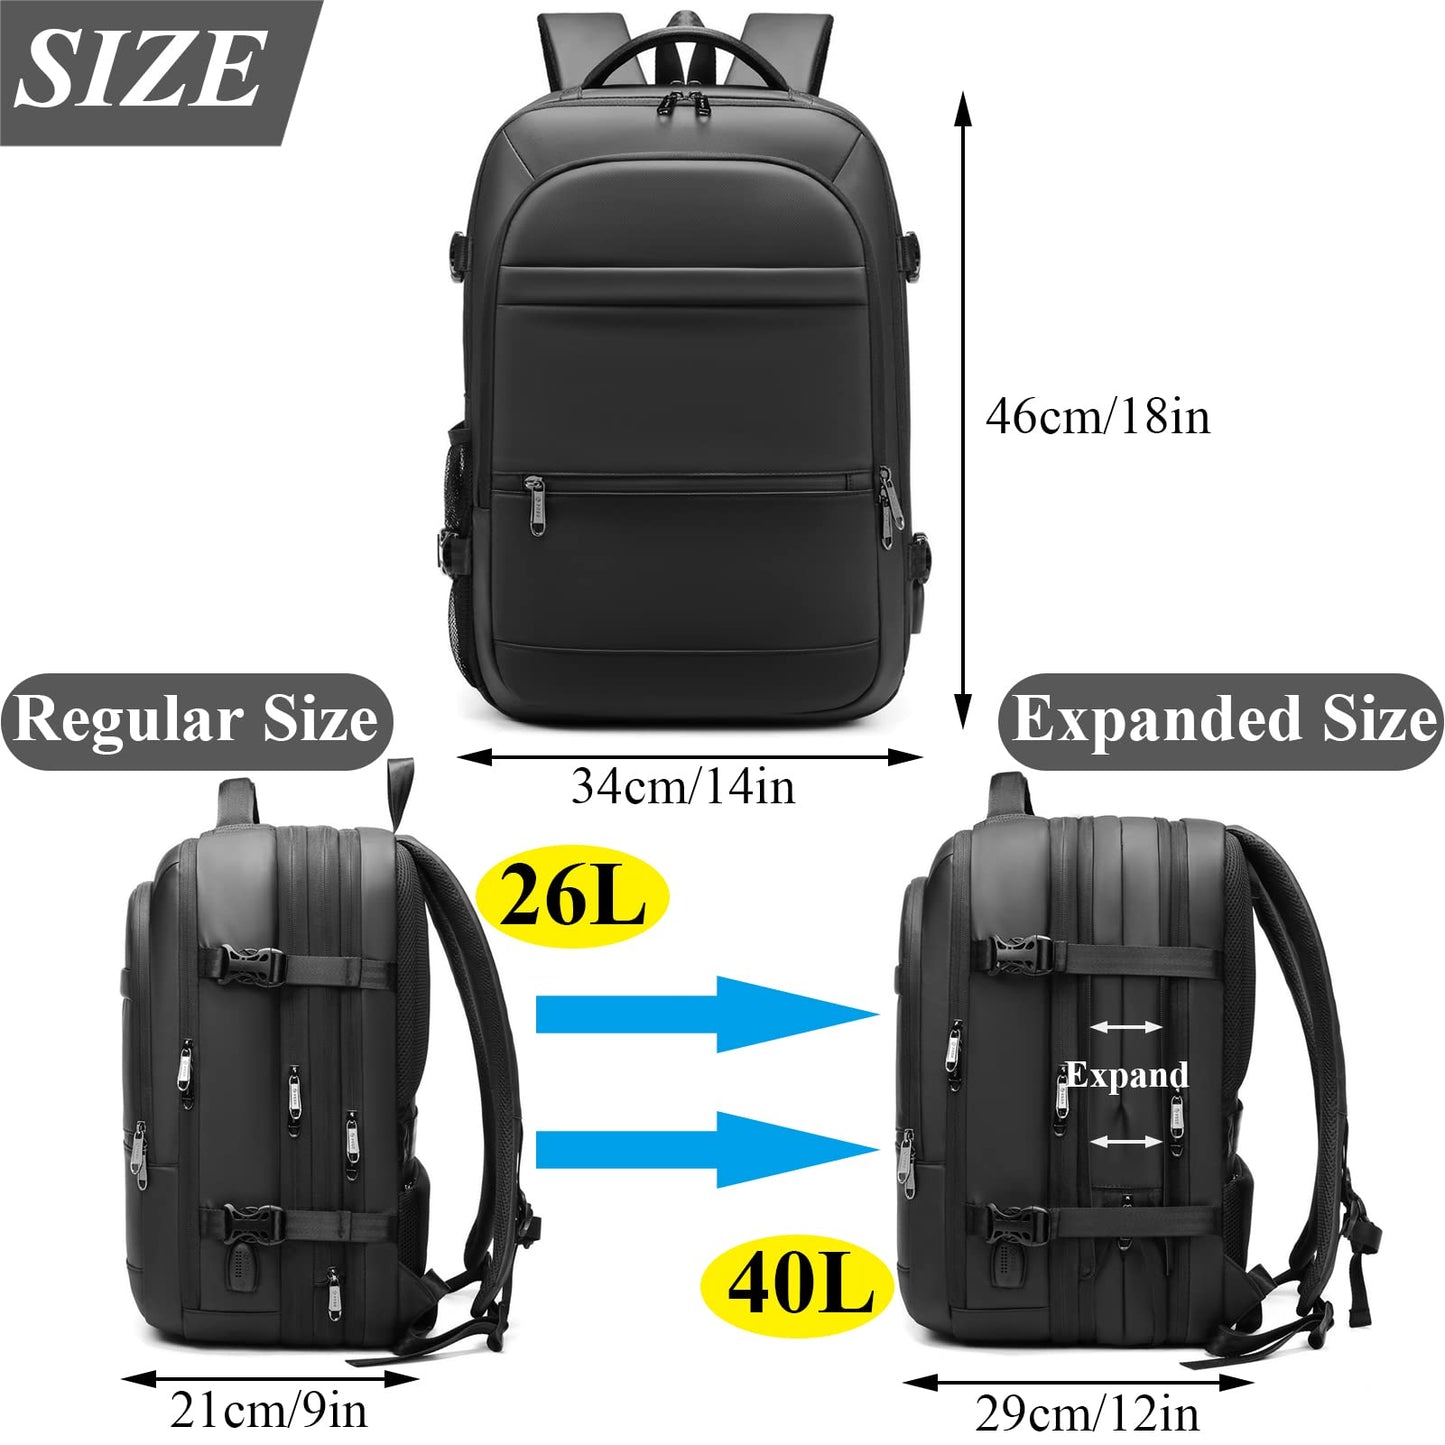 Qiccijoo Travel Backpack 40L Flight Approved Carry On Backpack for Men Women Expandable Large Luggage Backpack 17 Inch Waterproof Laptop Backpack Business School Weekender Overnight Backpack